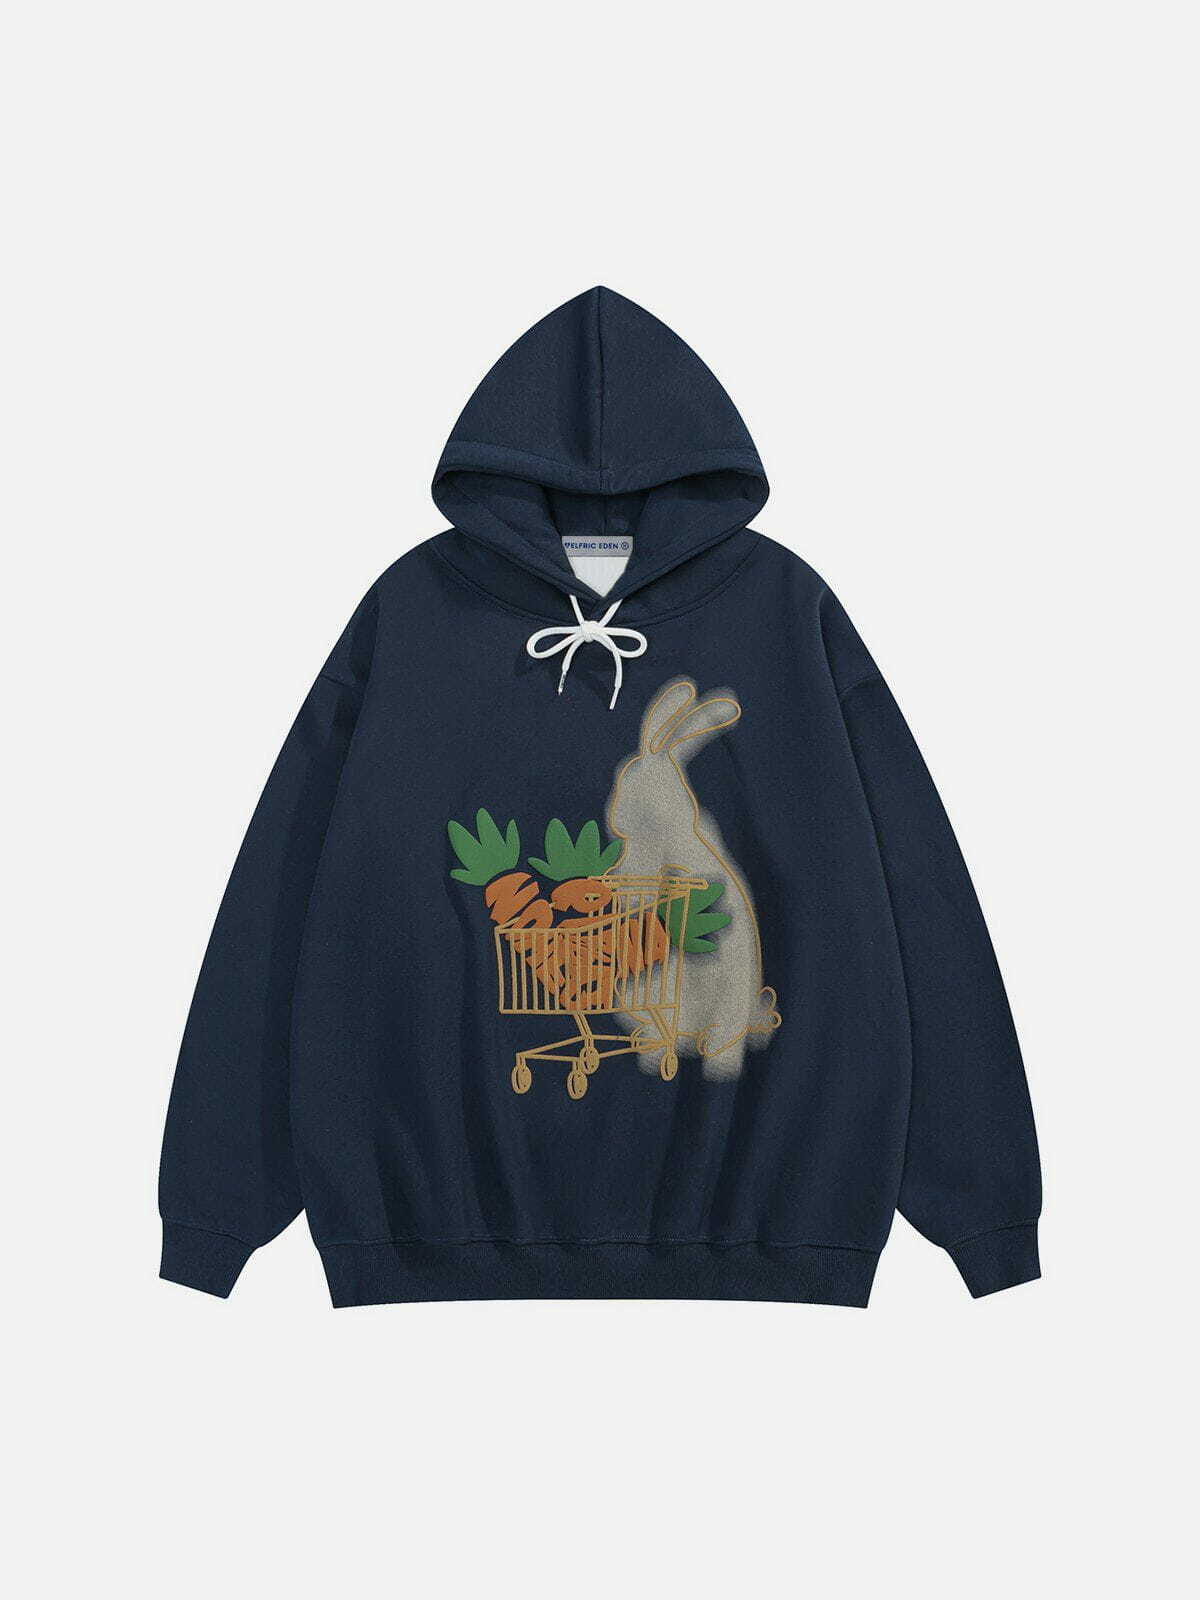 quirky rabbit print hoodie playful & youthful streetwear 7559